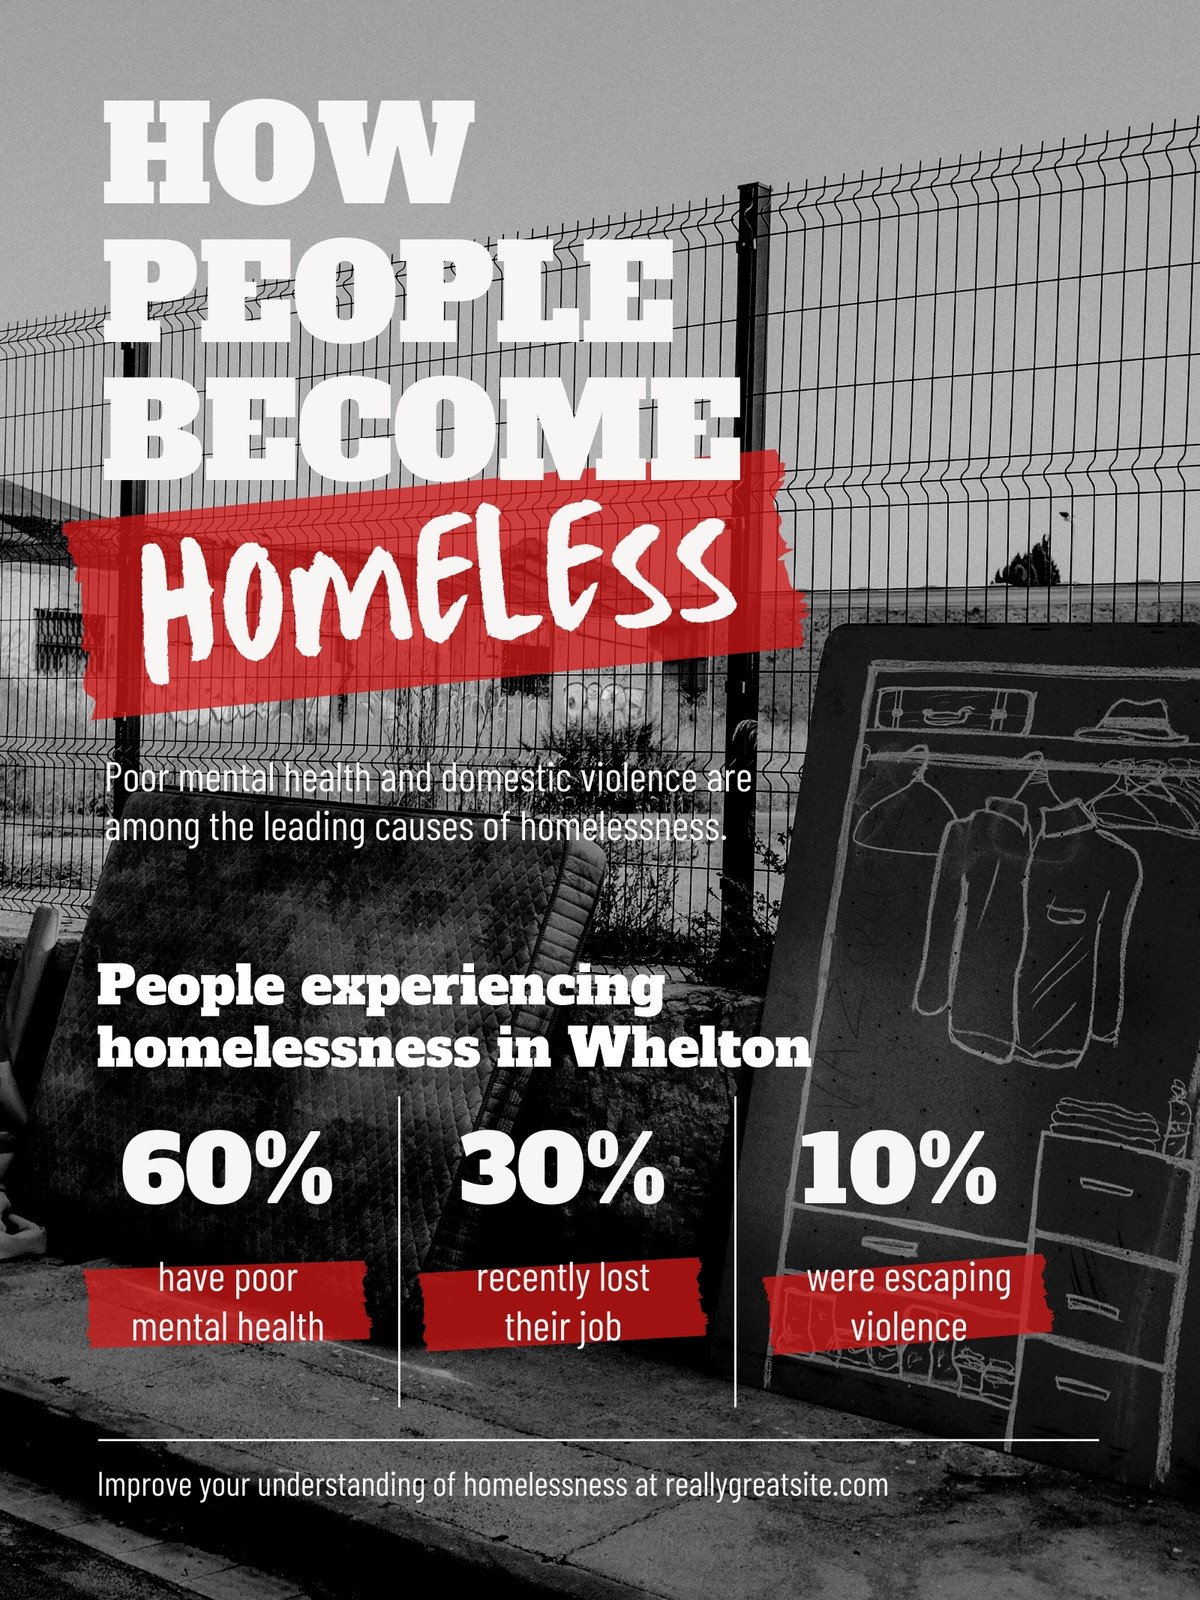 why people become homeless